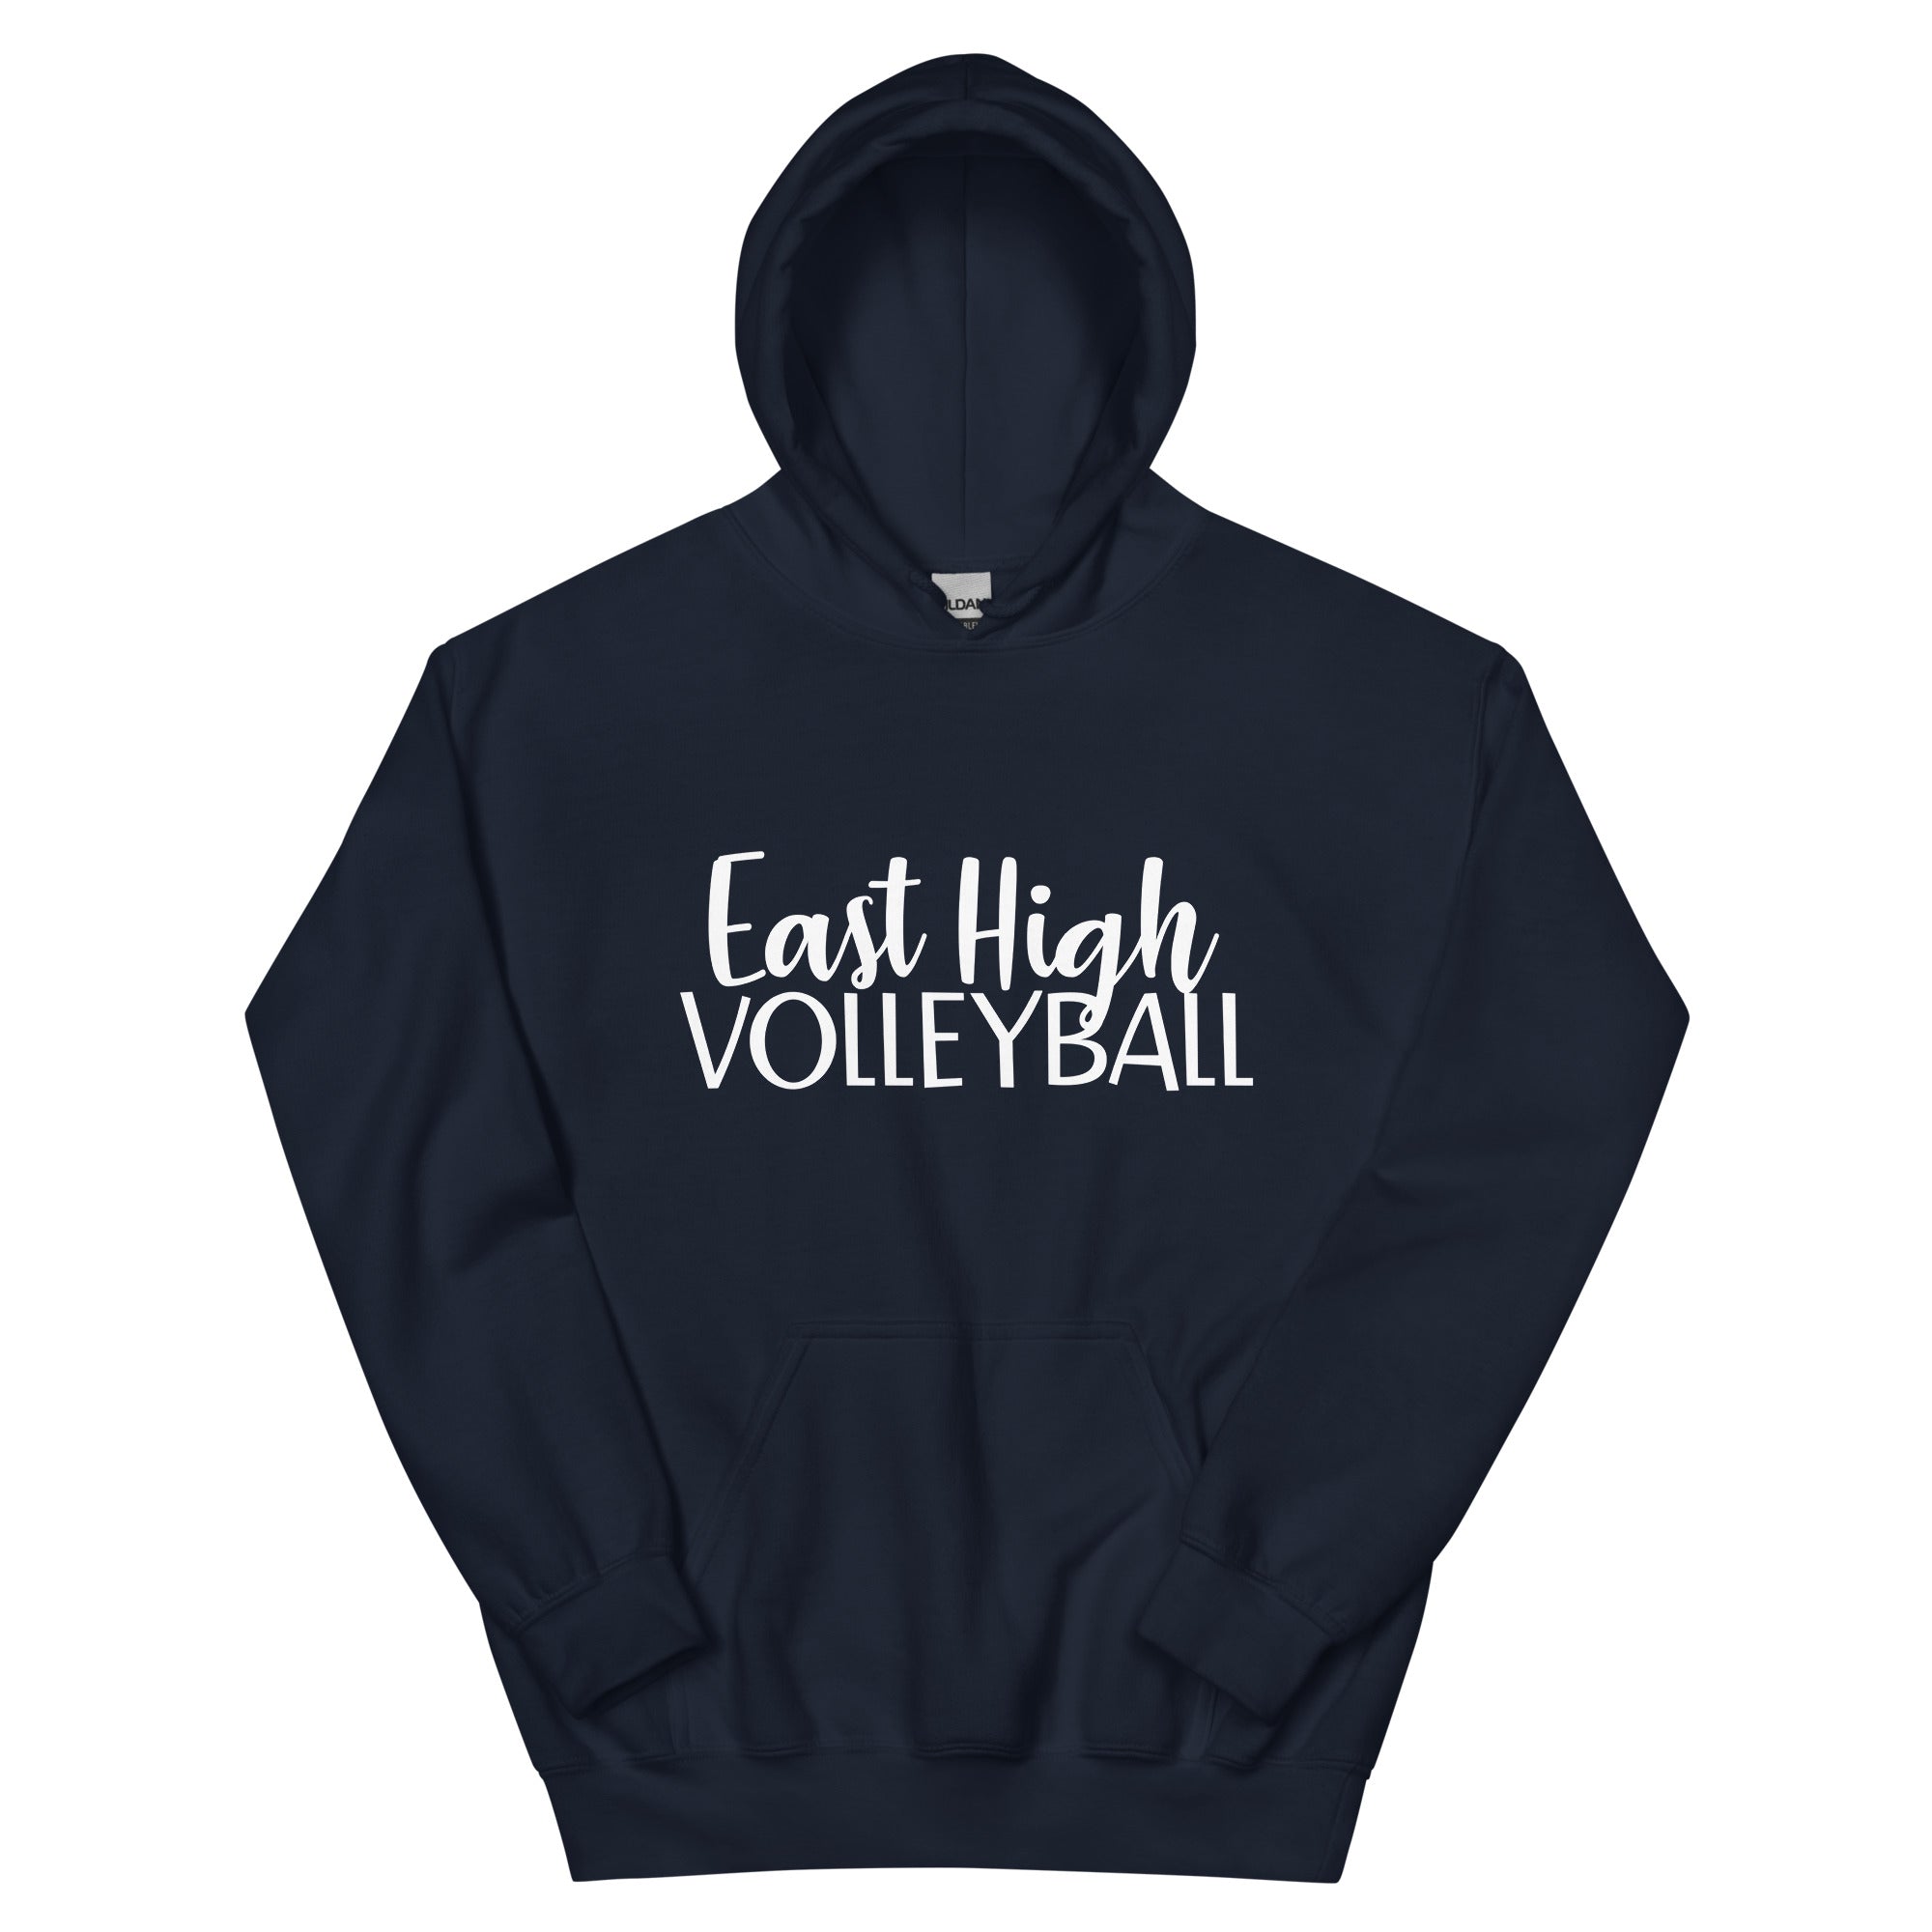 East High Volleyball Unisex Hoodie